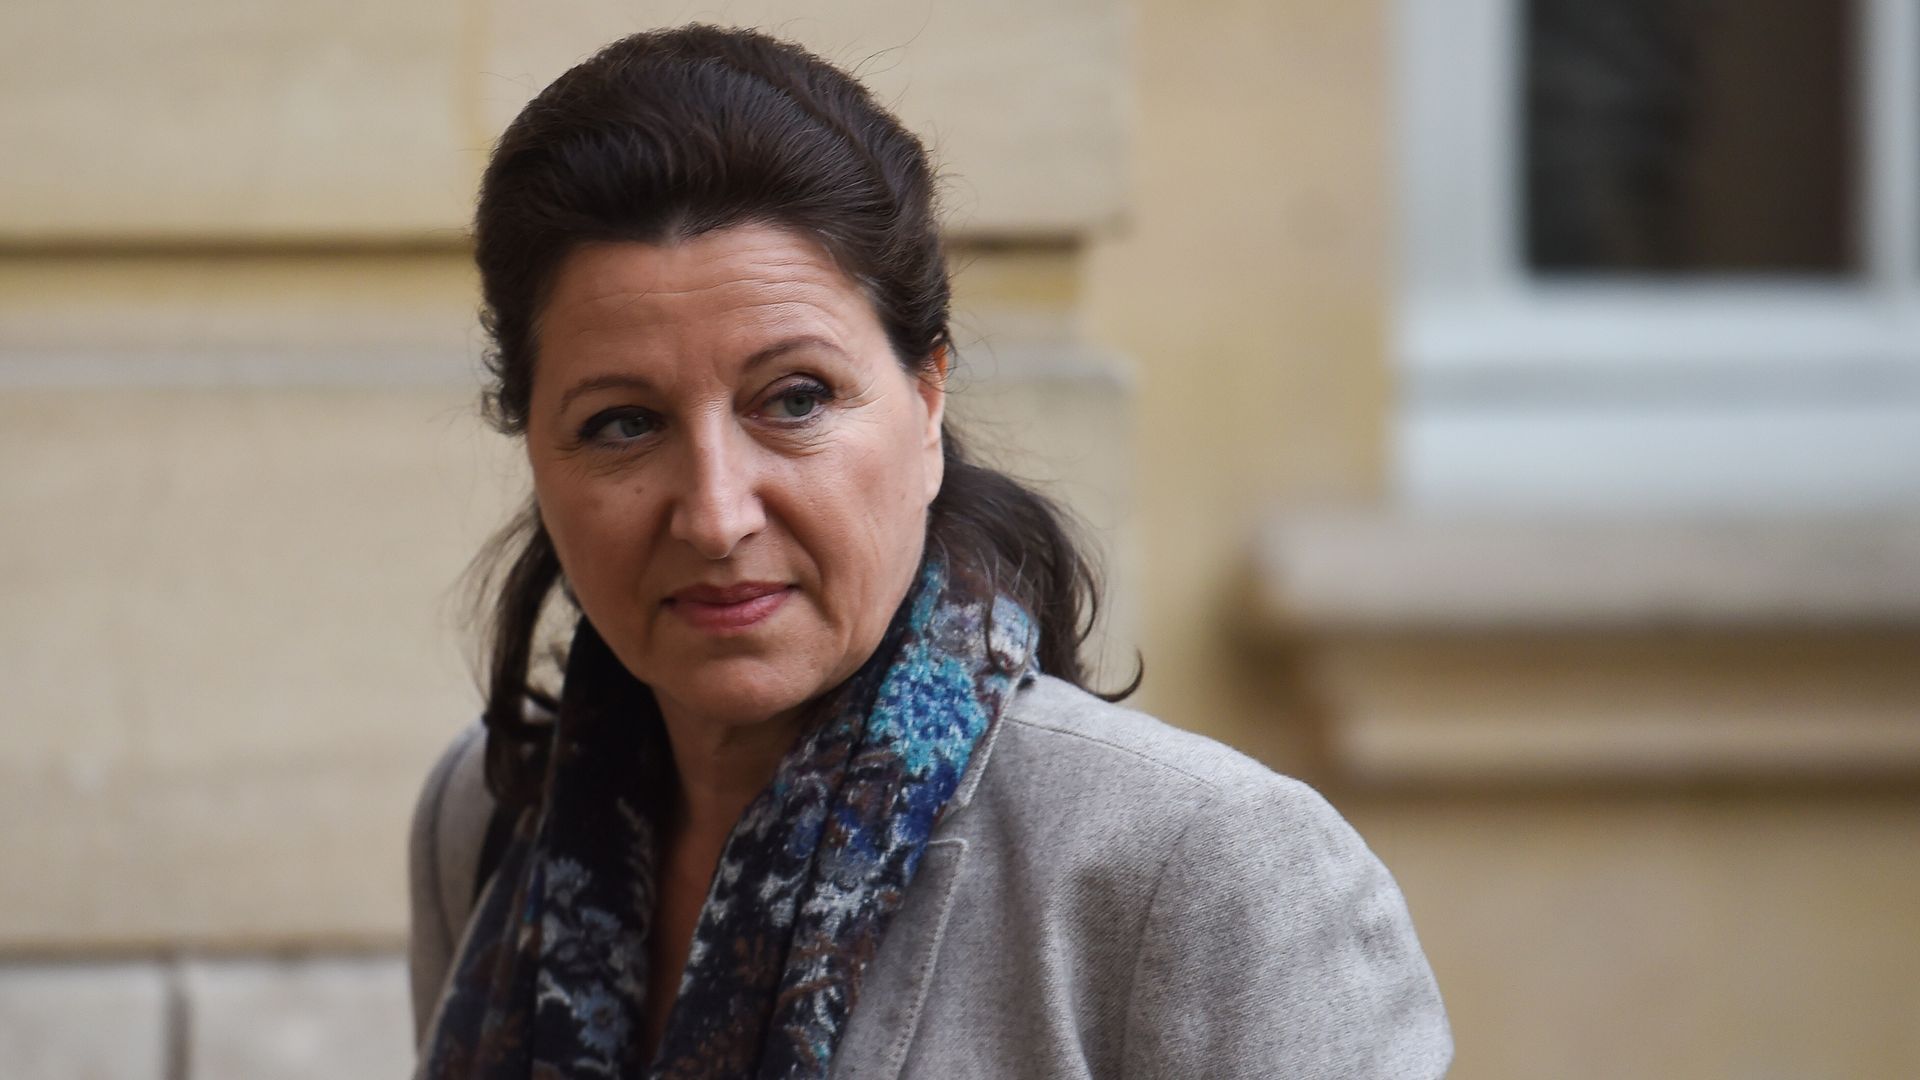 French Health and Solidarity Minister Agnes Buzyn arrives for a meeting with other ministers regarding measures to be taken after the first cases of coronavirus infection in France in January 2020